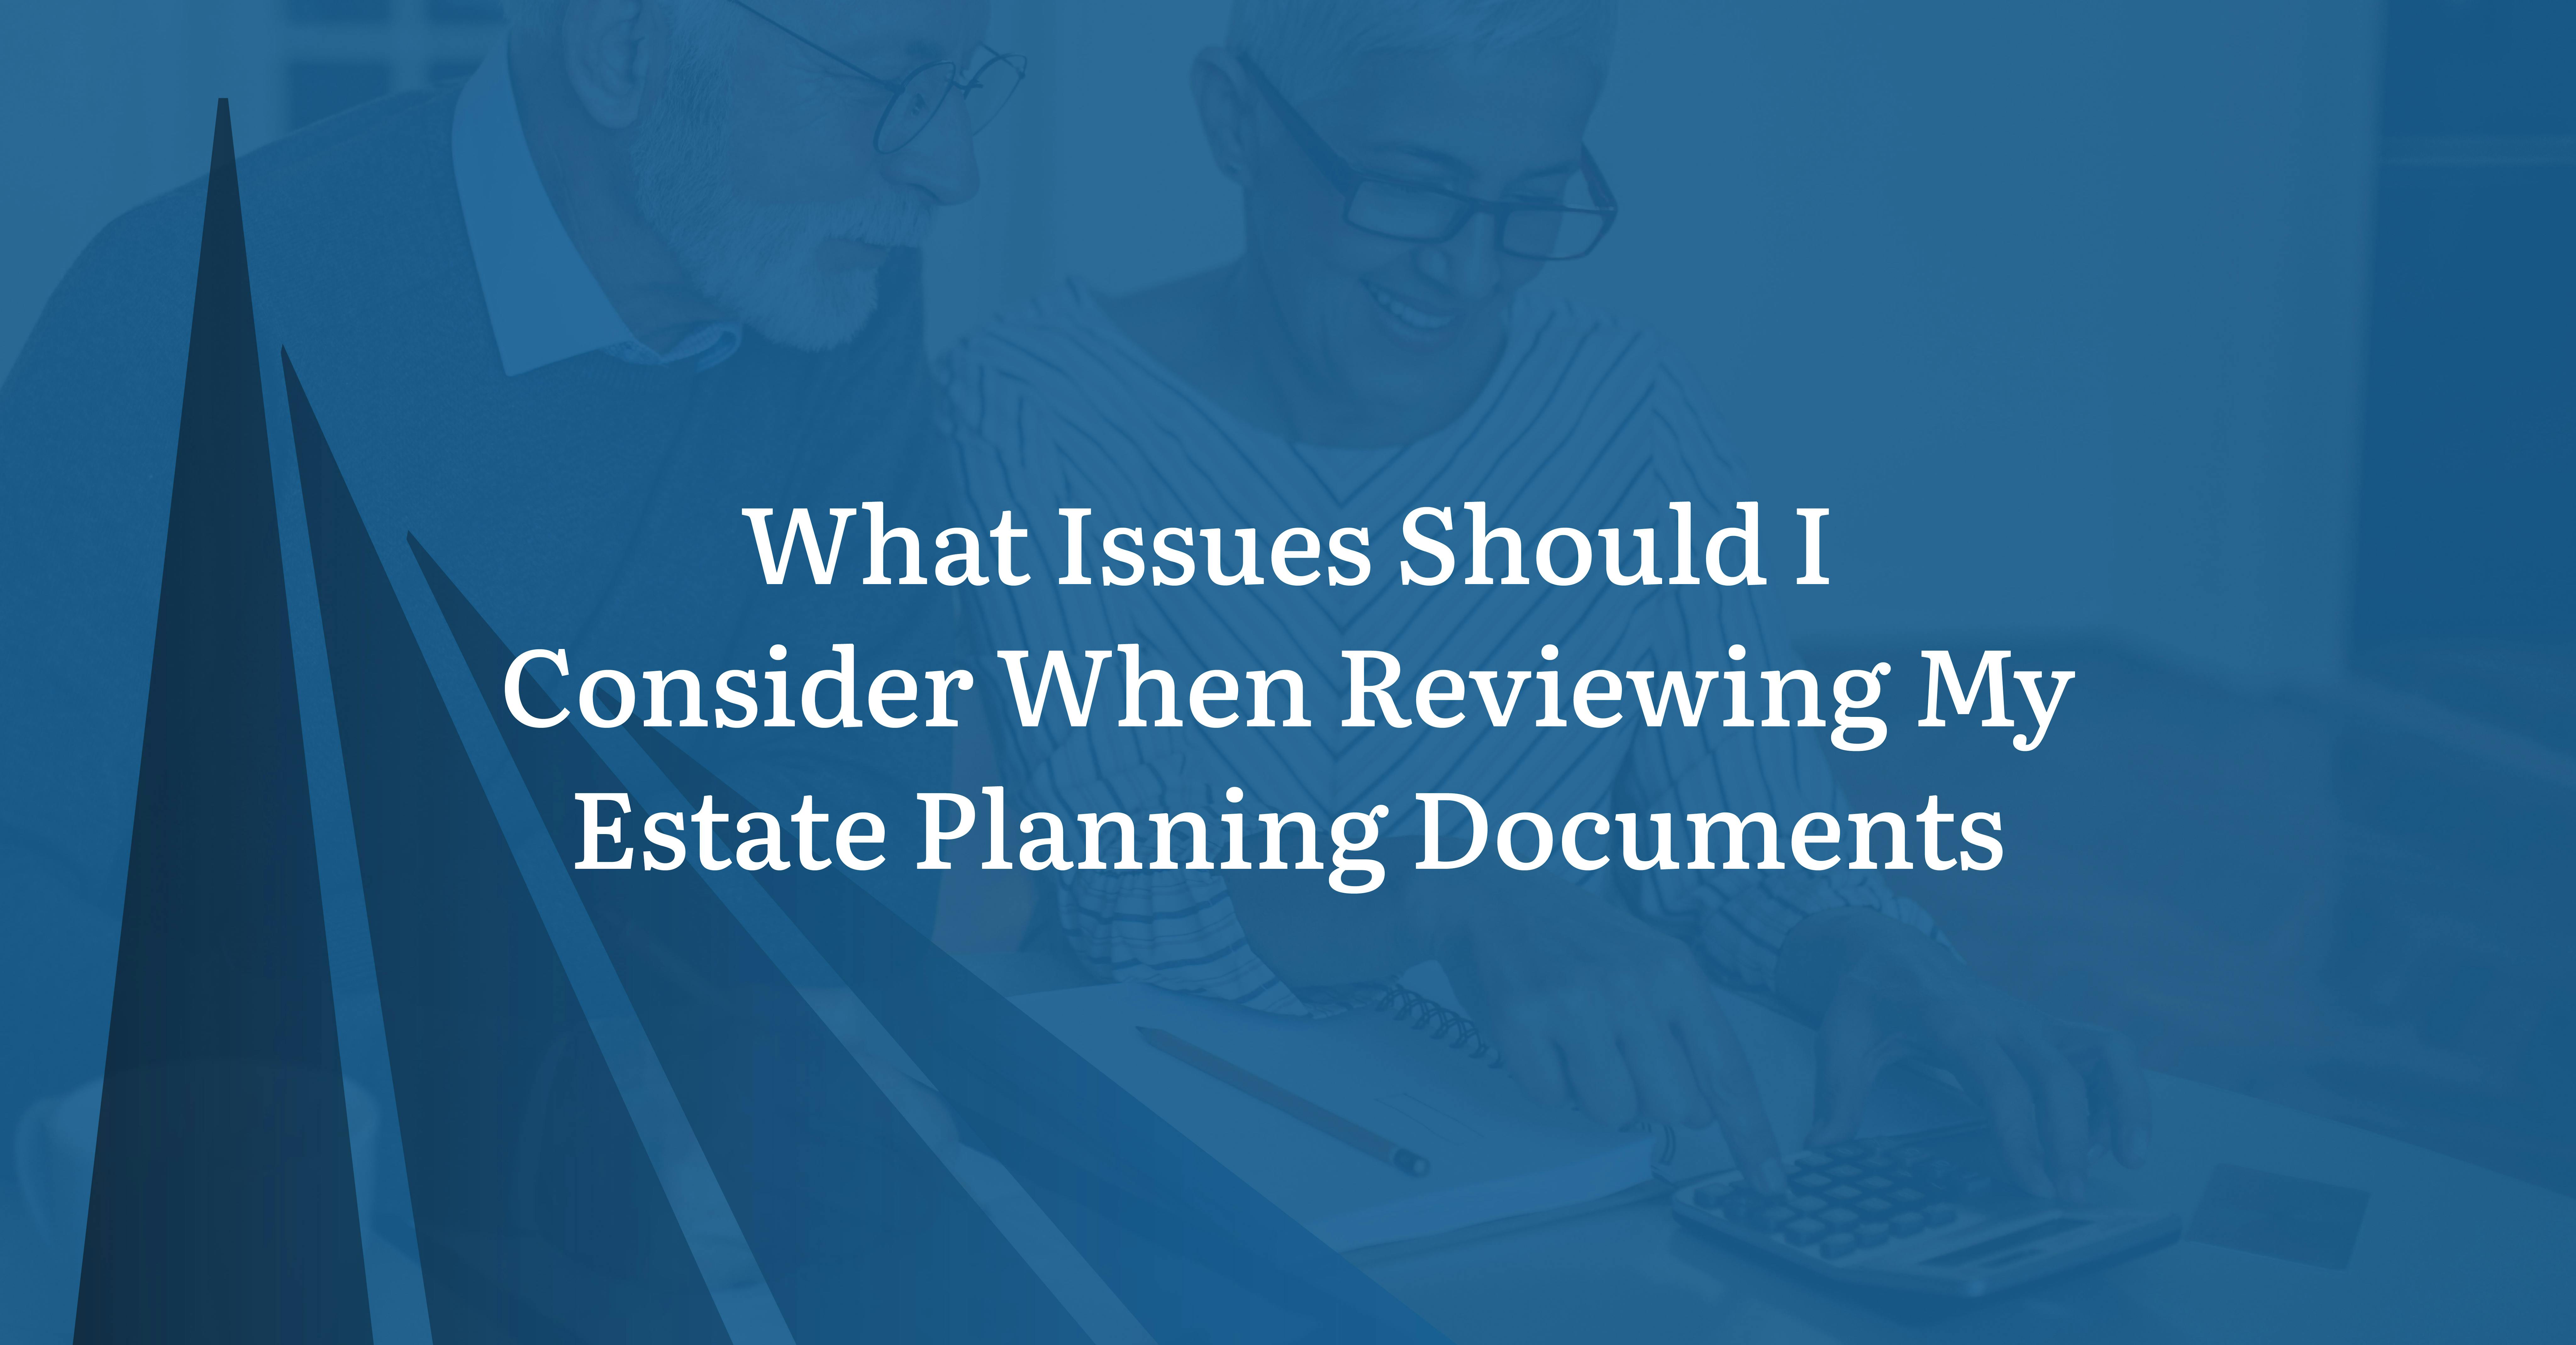 What Issues Should I Consider When Reviewing My Estate Planning Documents